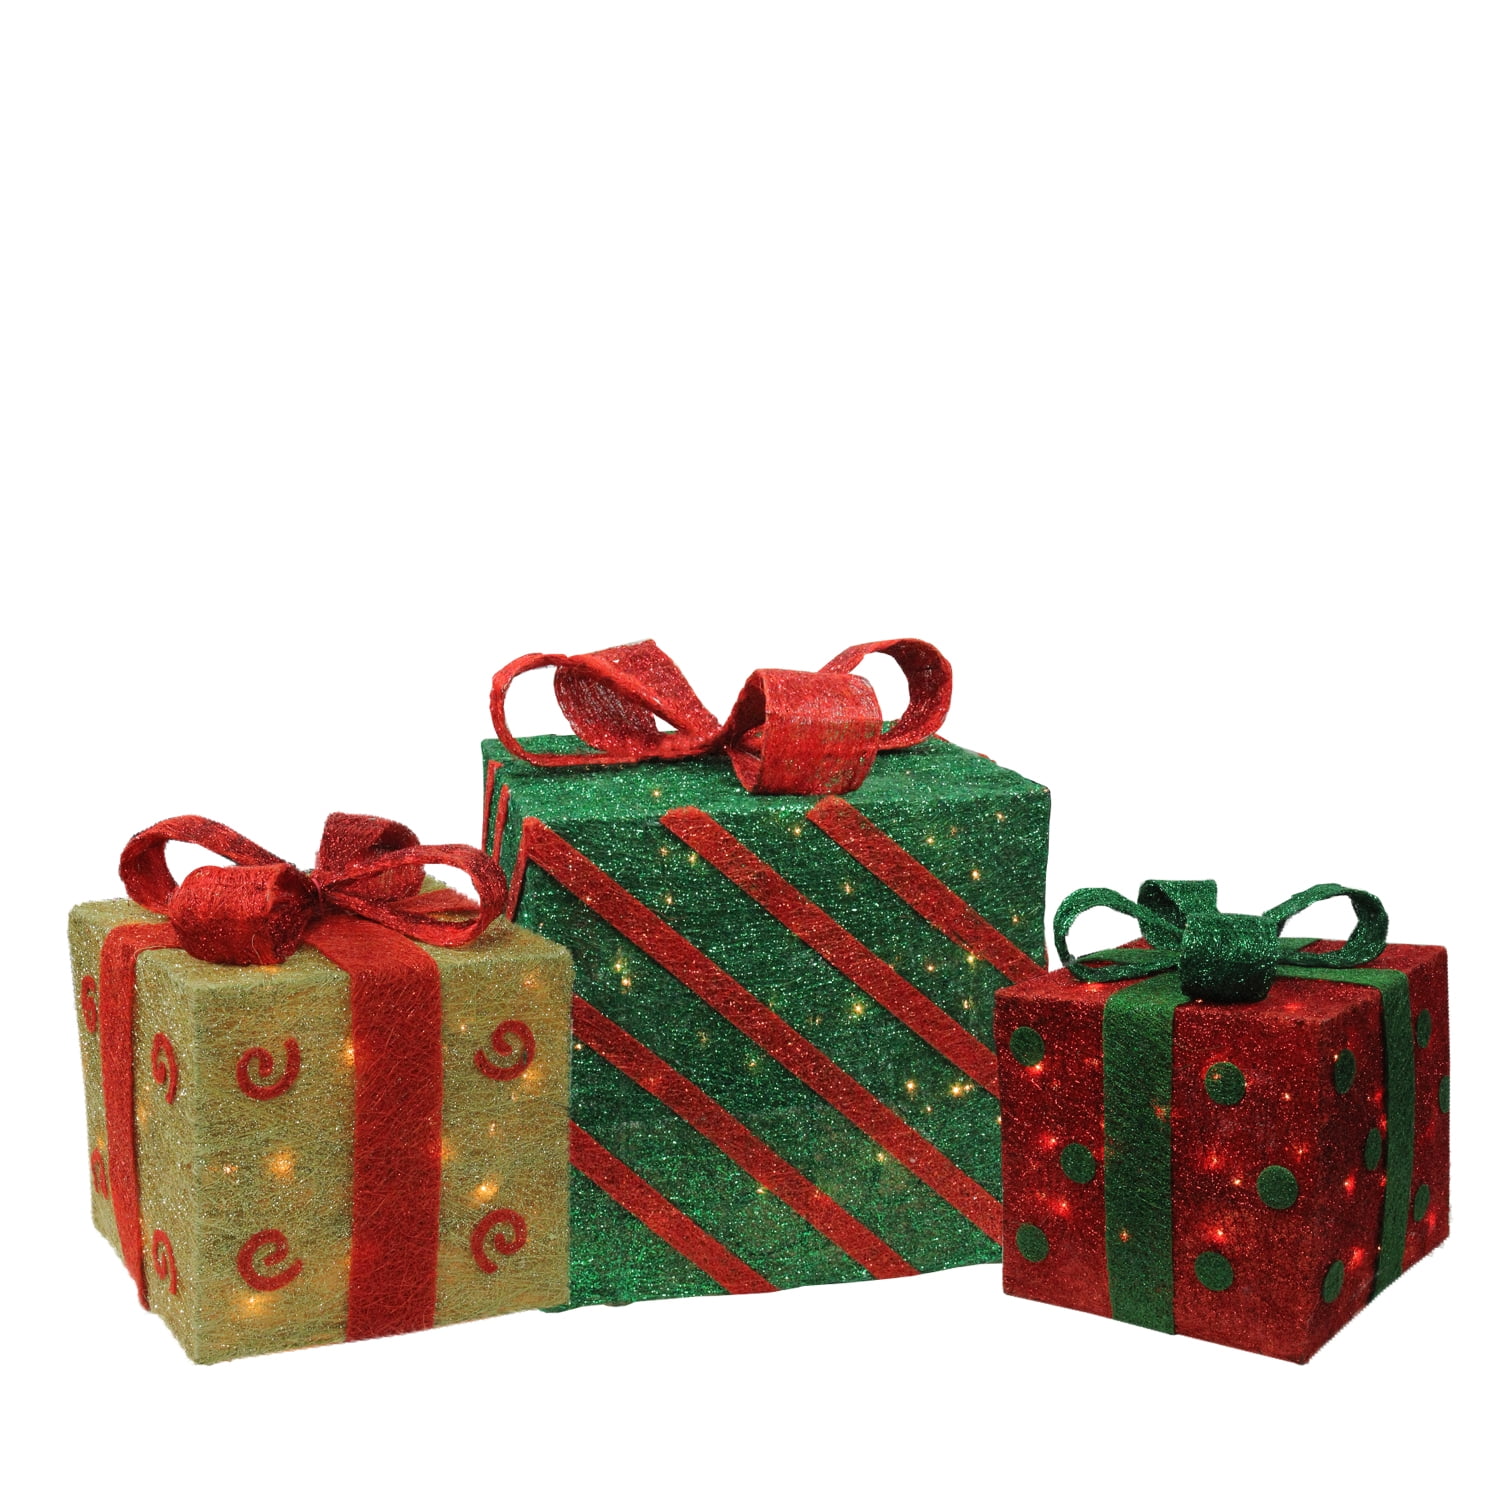 Northlight Set of 3 Lighted Green and Red Gift Boxes Christmas Outdoor ...